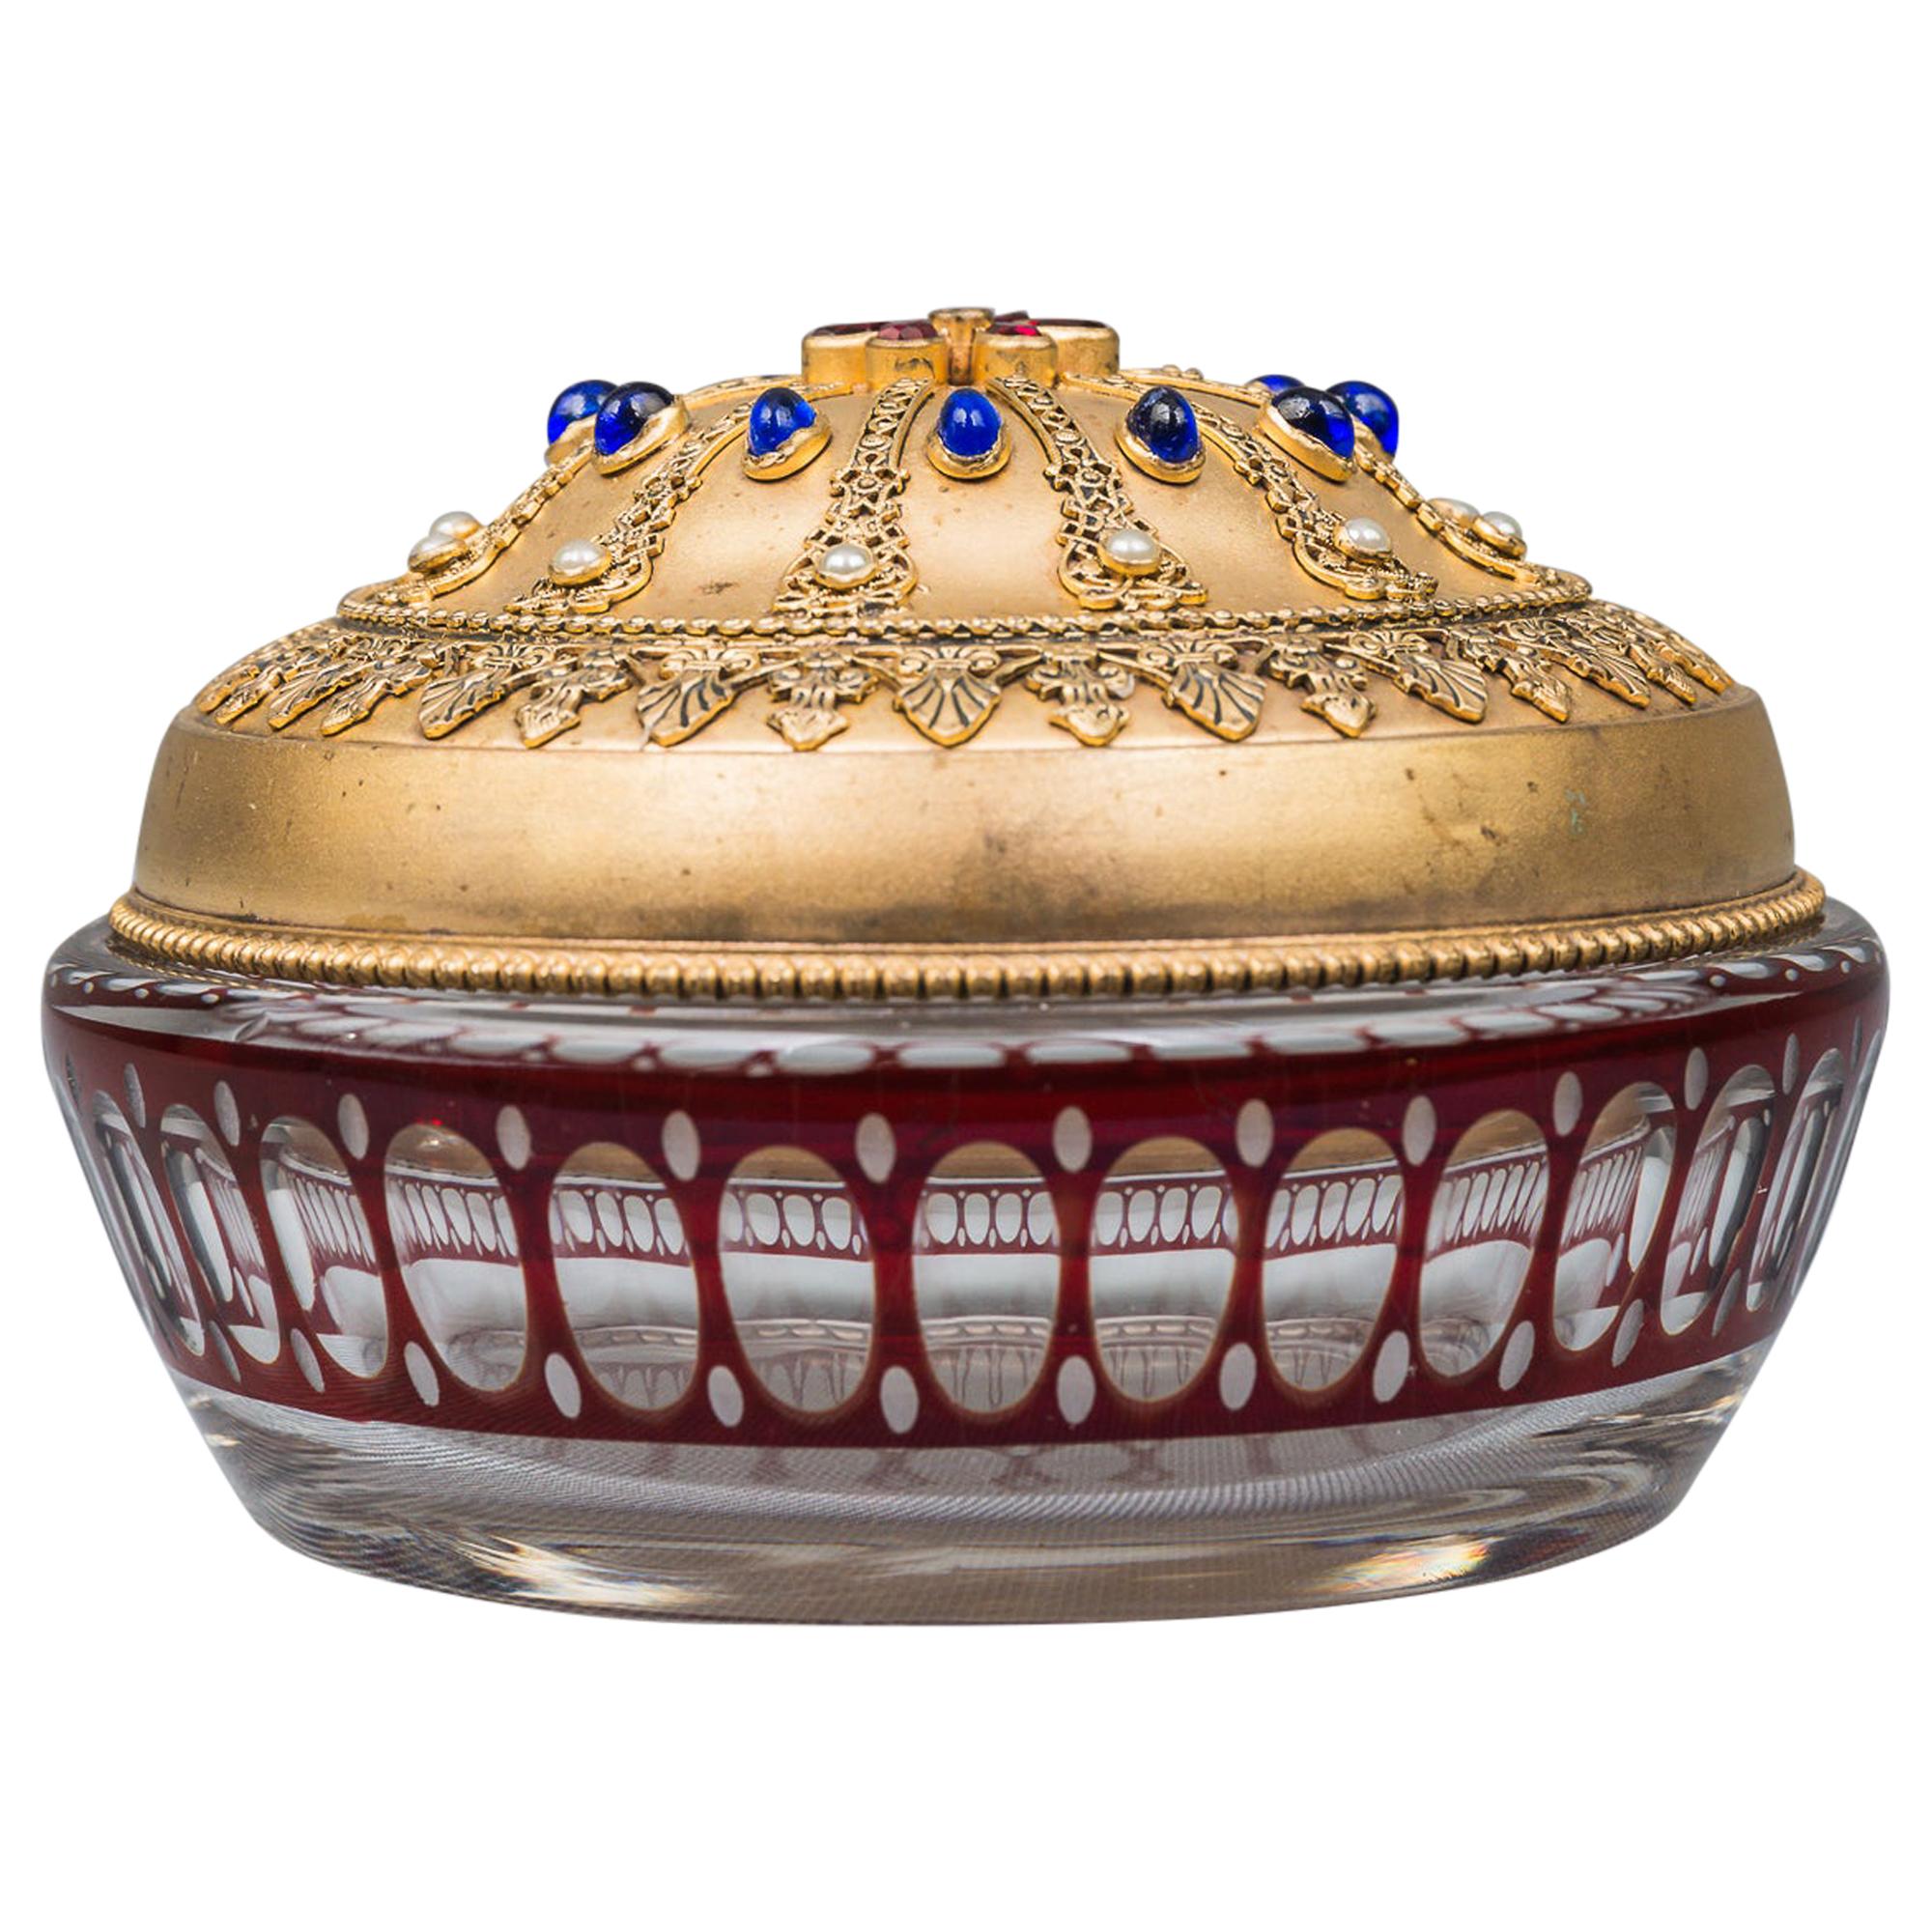 Historistic Sugar Bowl with Gilded Cover and Cut Glass, circa 1890s